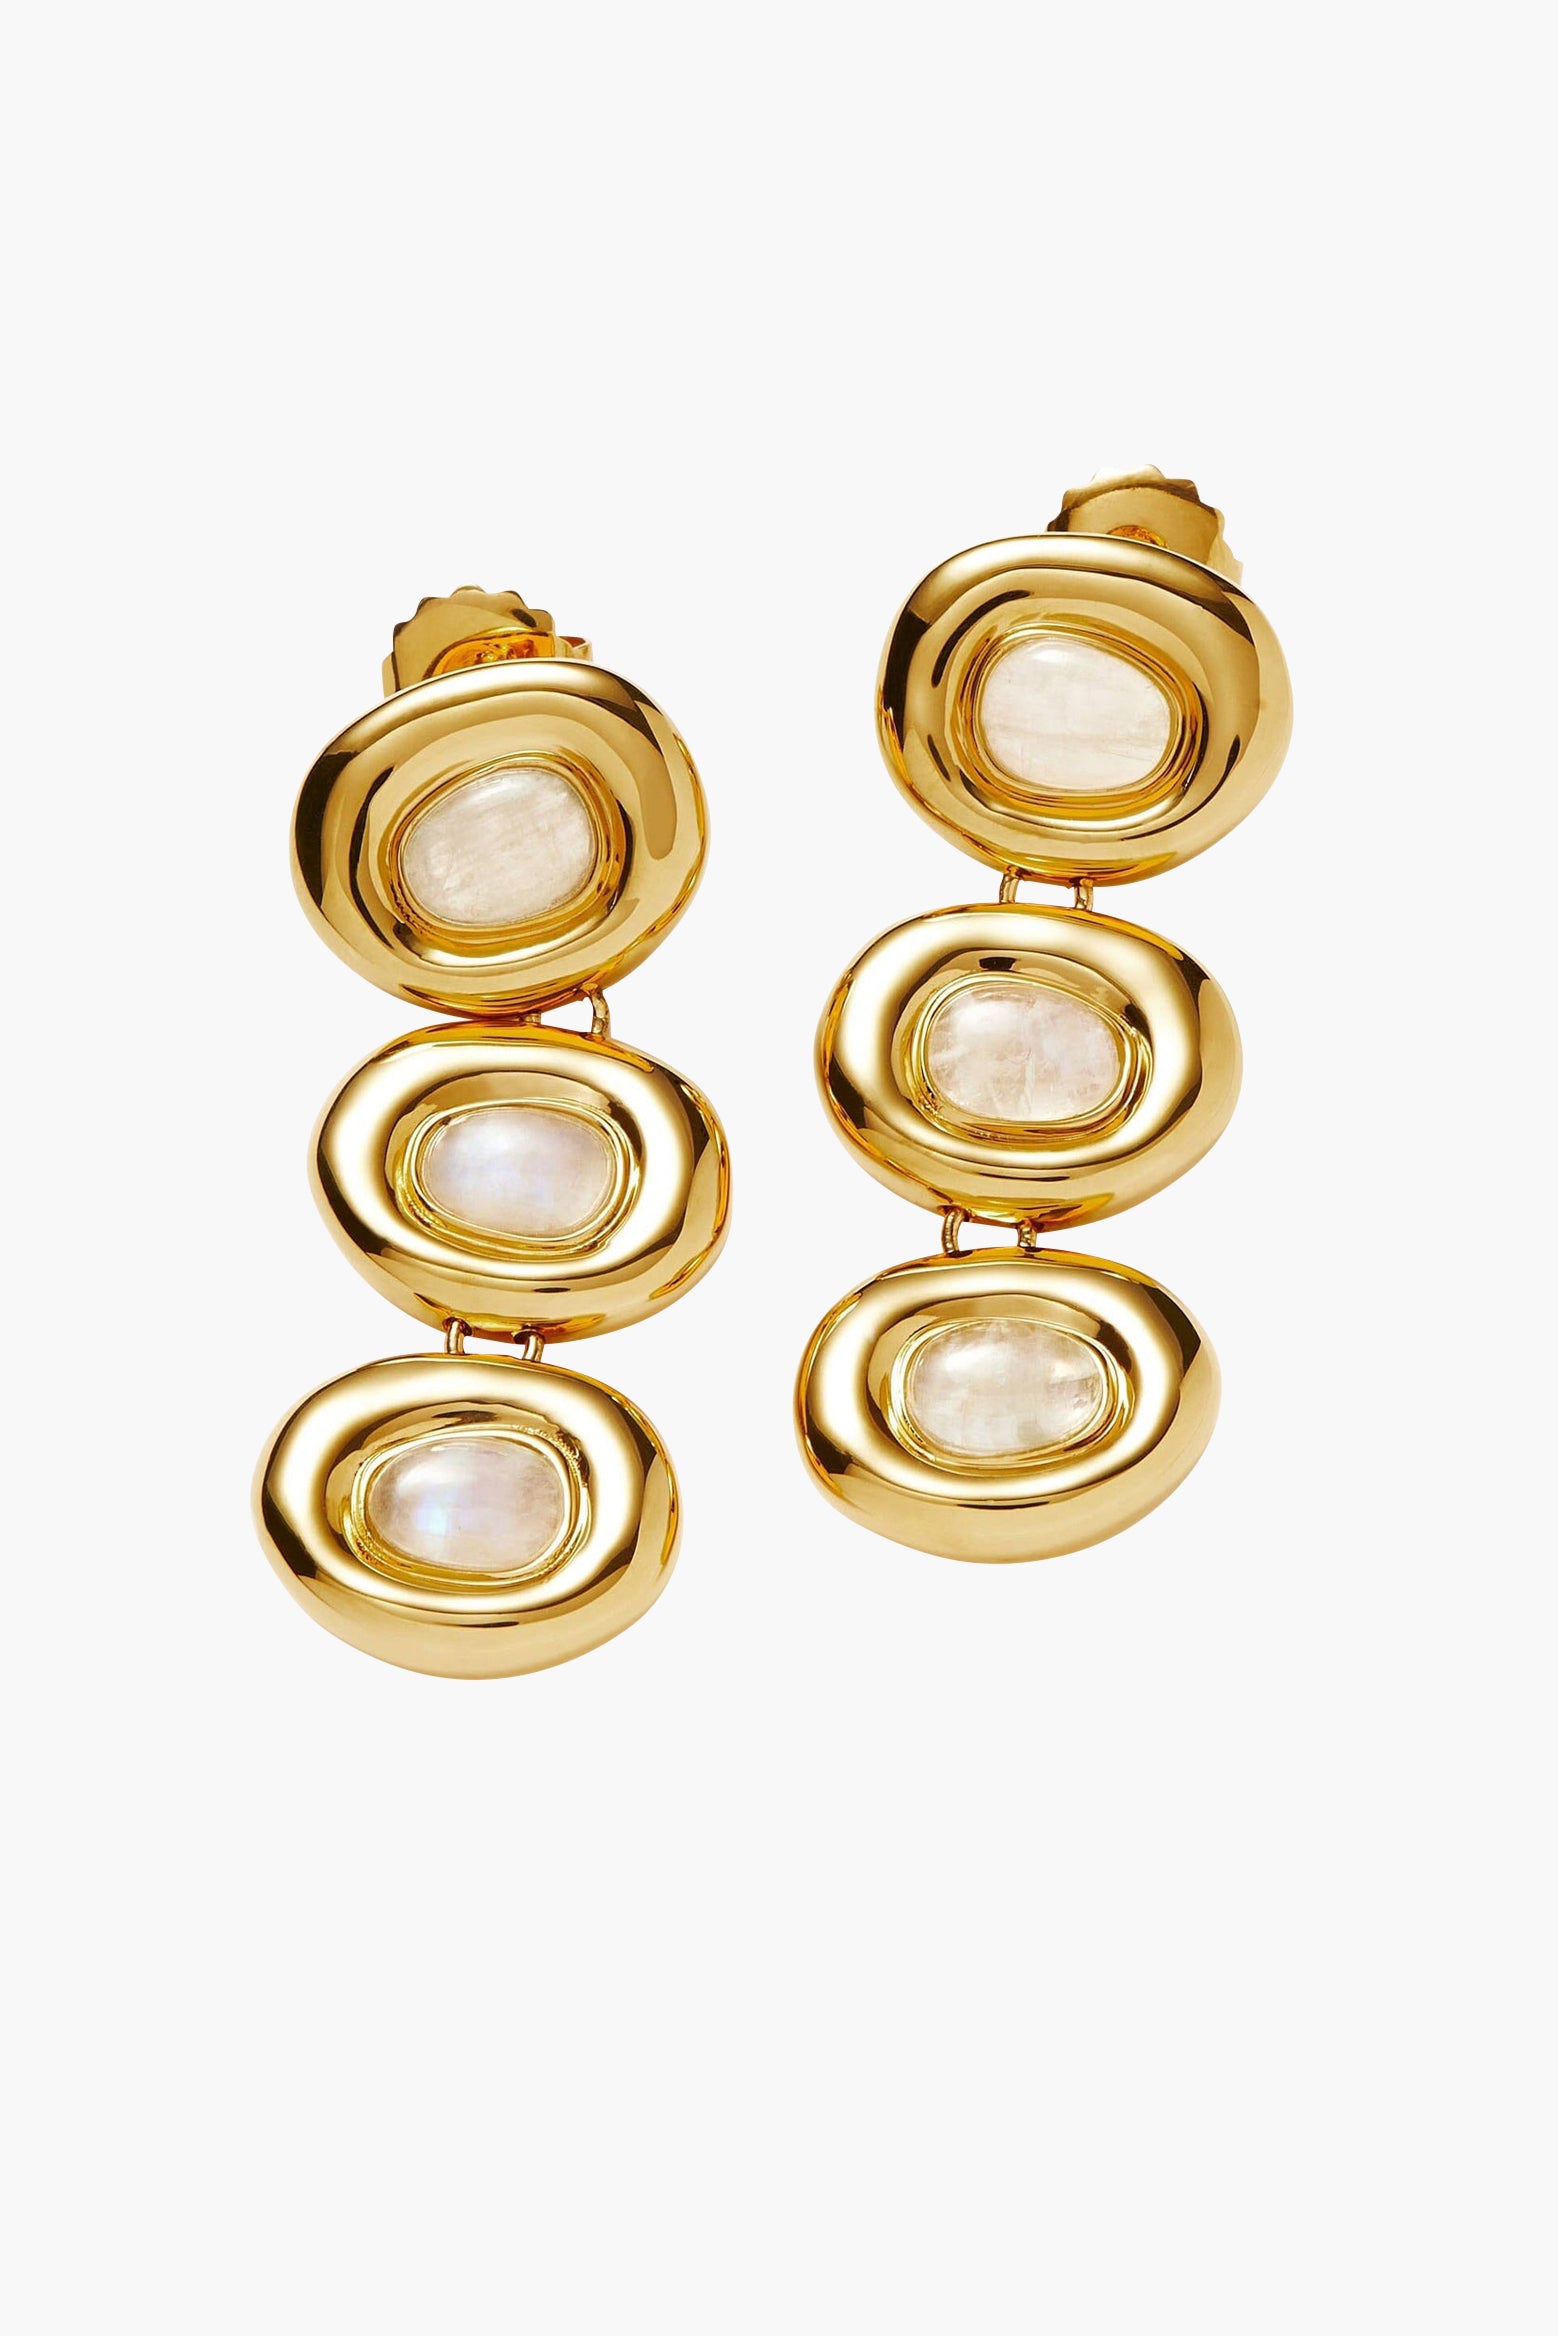 Missoma Doughnut Long Drop Hoops in Gold. Shop Missoma at The New Trend. Free Shipping over $300 AUD.